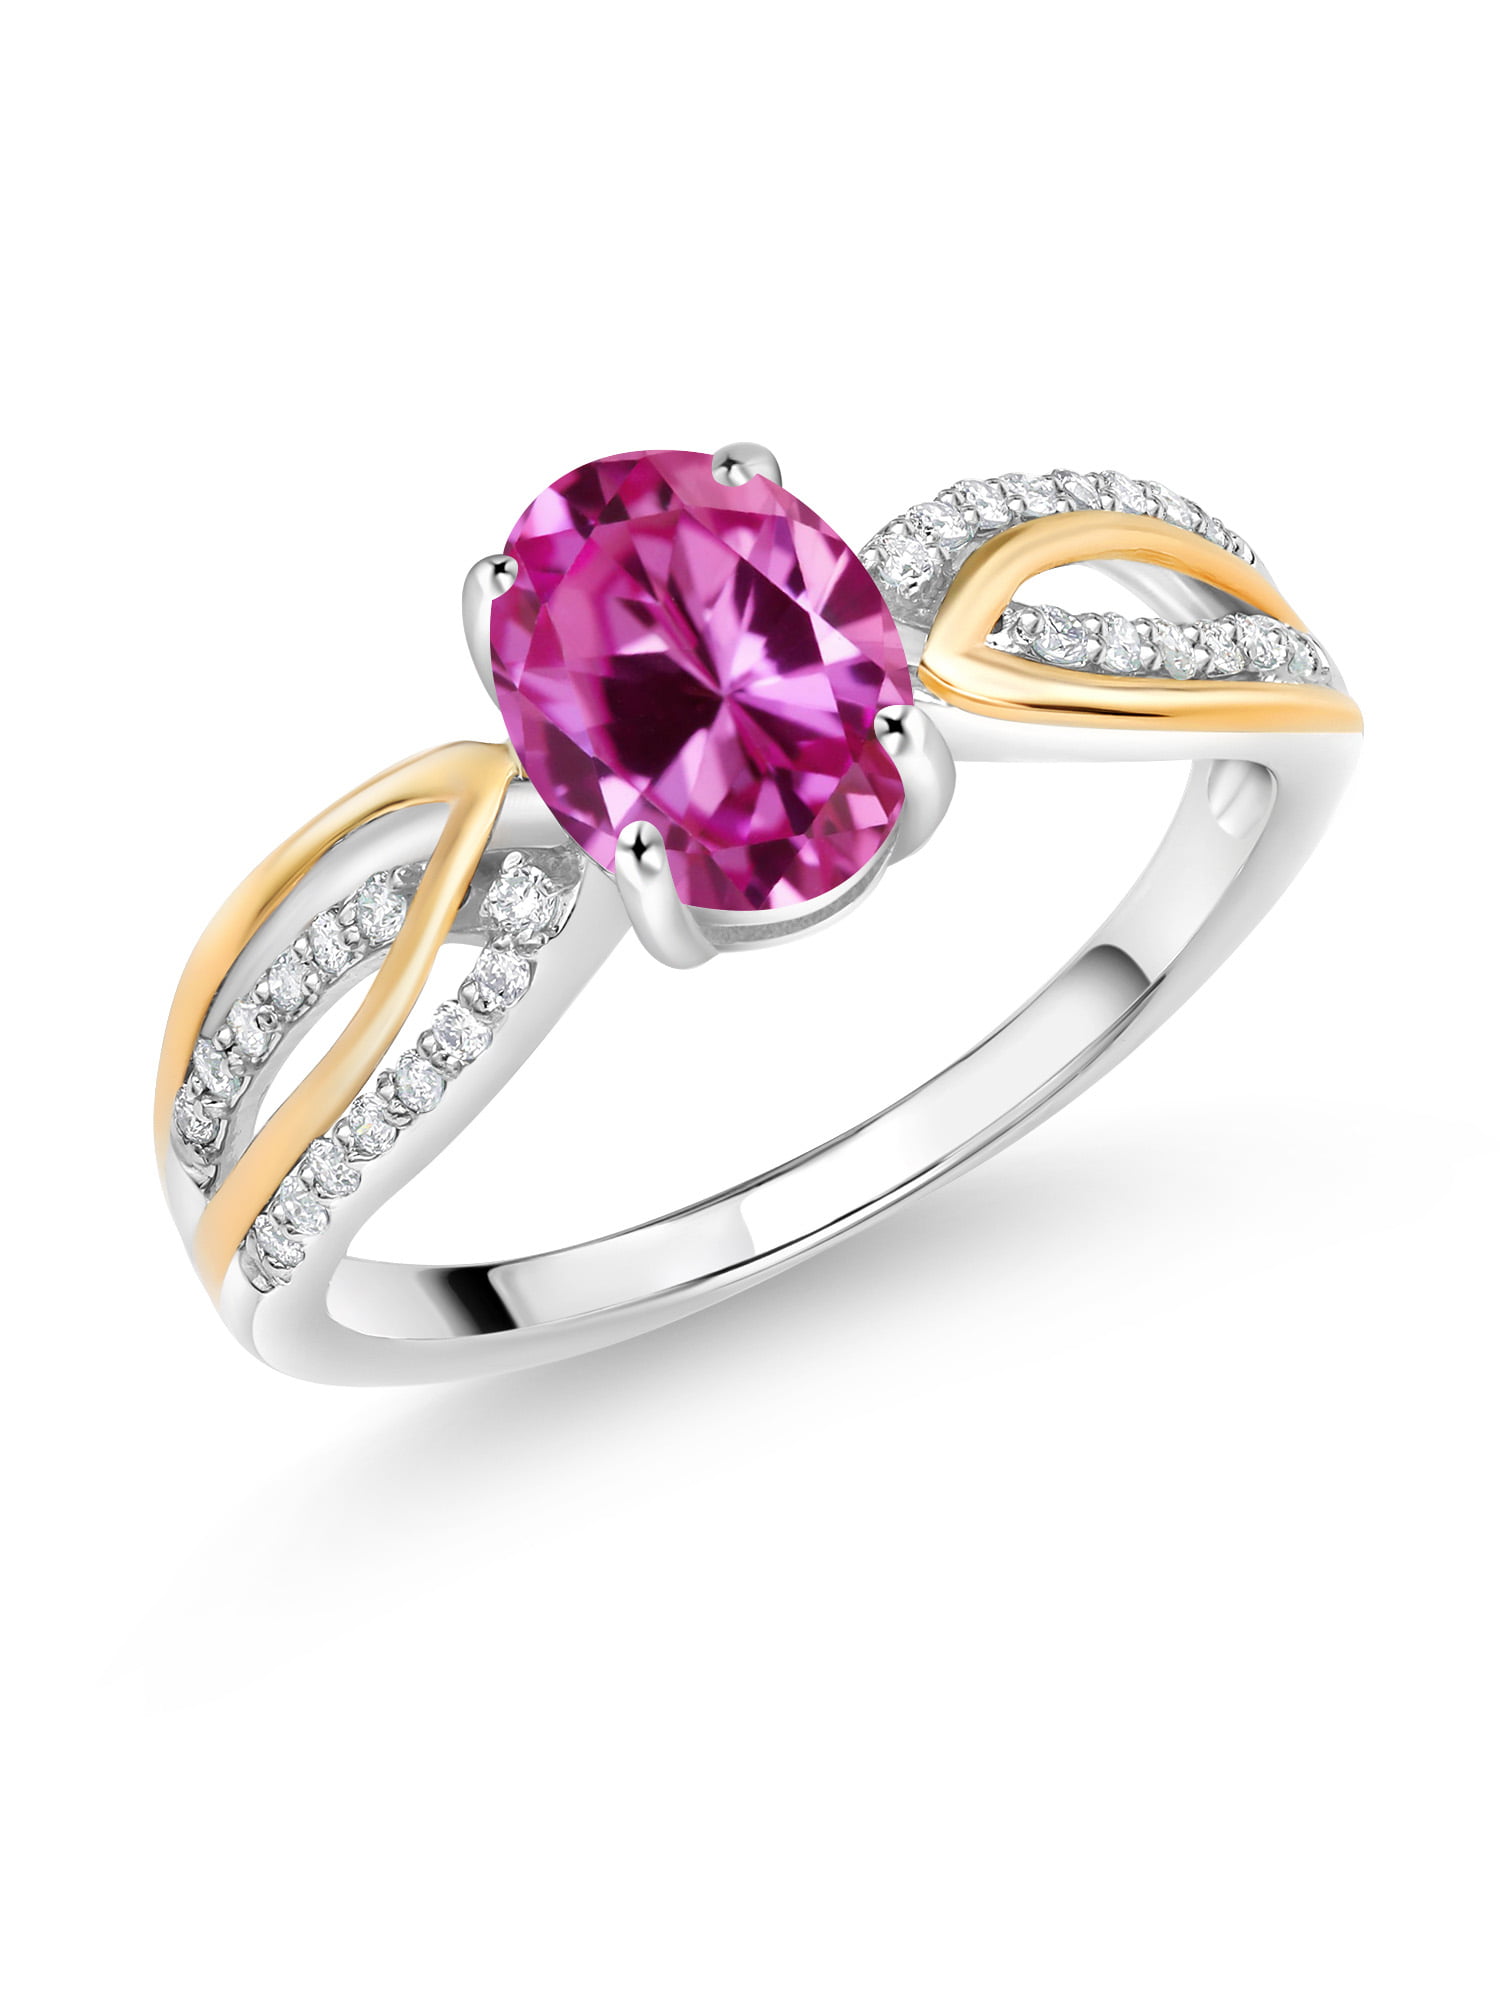 Gem Stone King 1.00 Ct Oval Pink Created Sapphire 925 Yellow Gold Plated Silver Ring